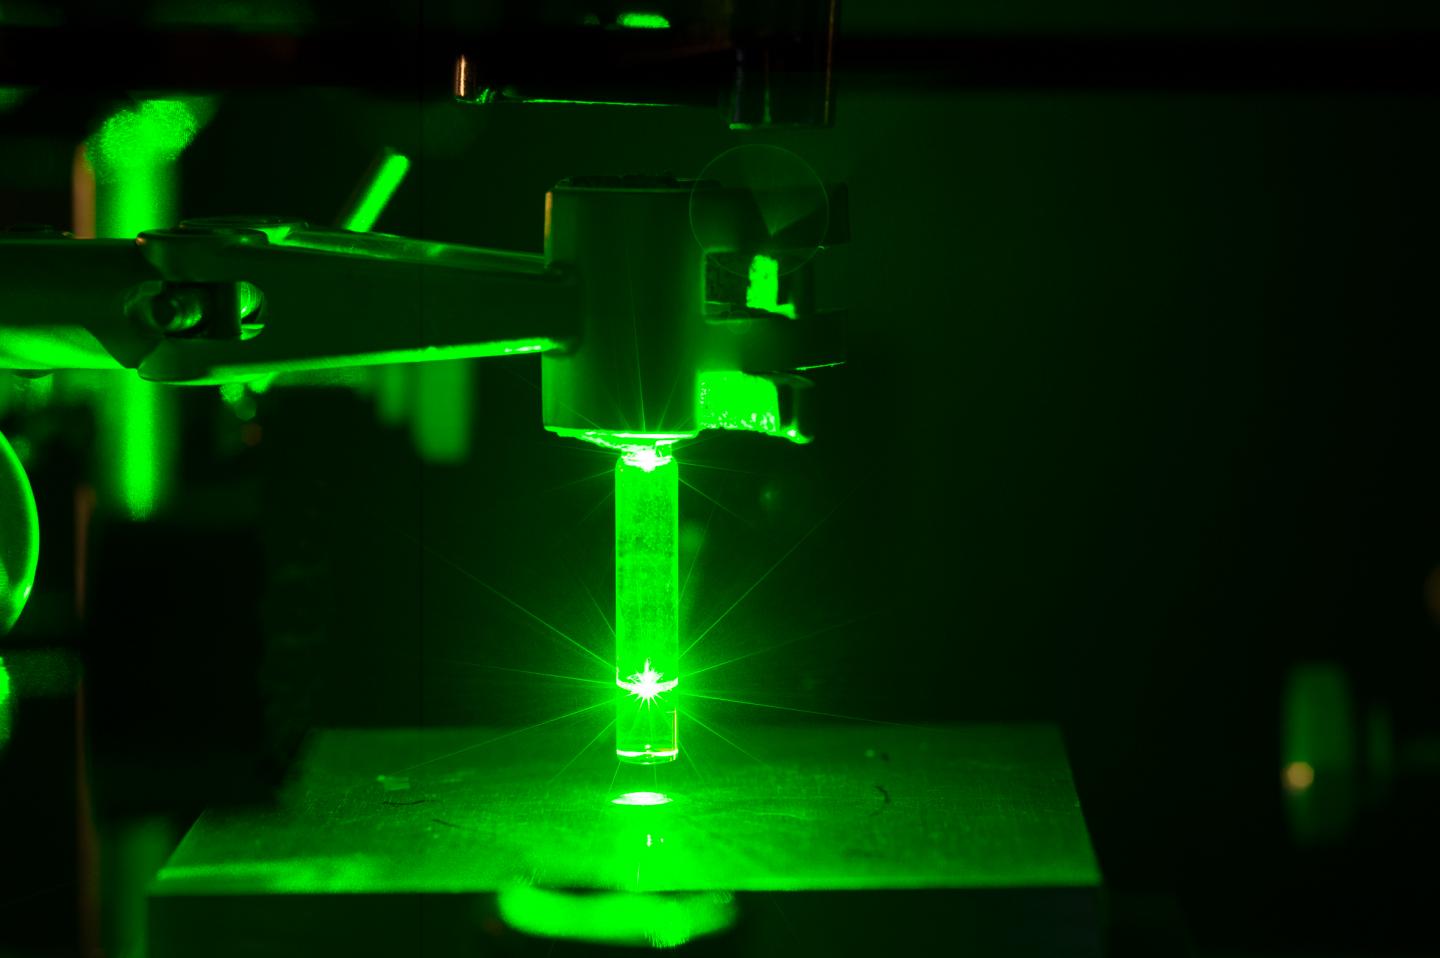 System modulates visible light to control chemical reactions, Queensland Univ.